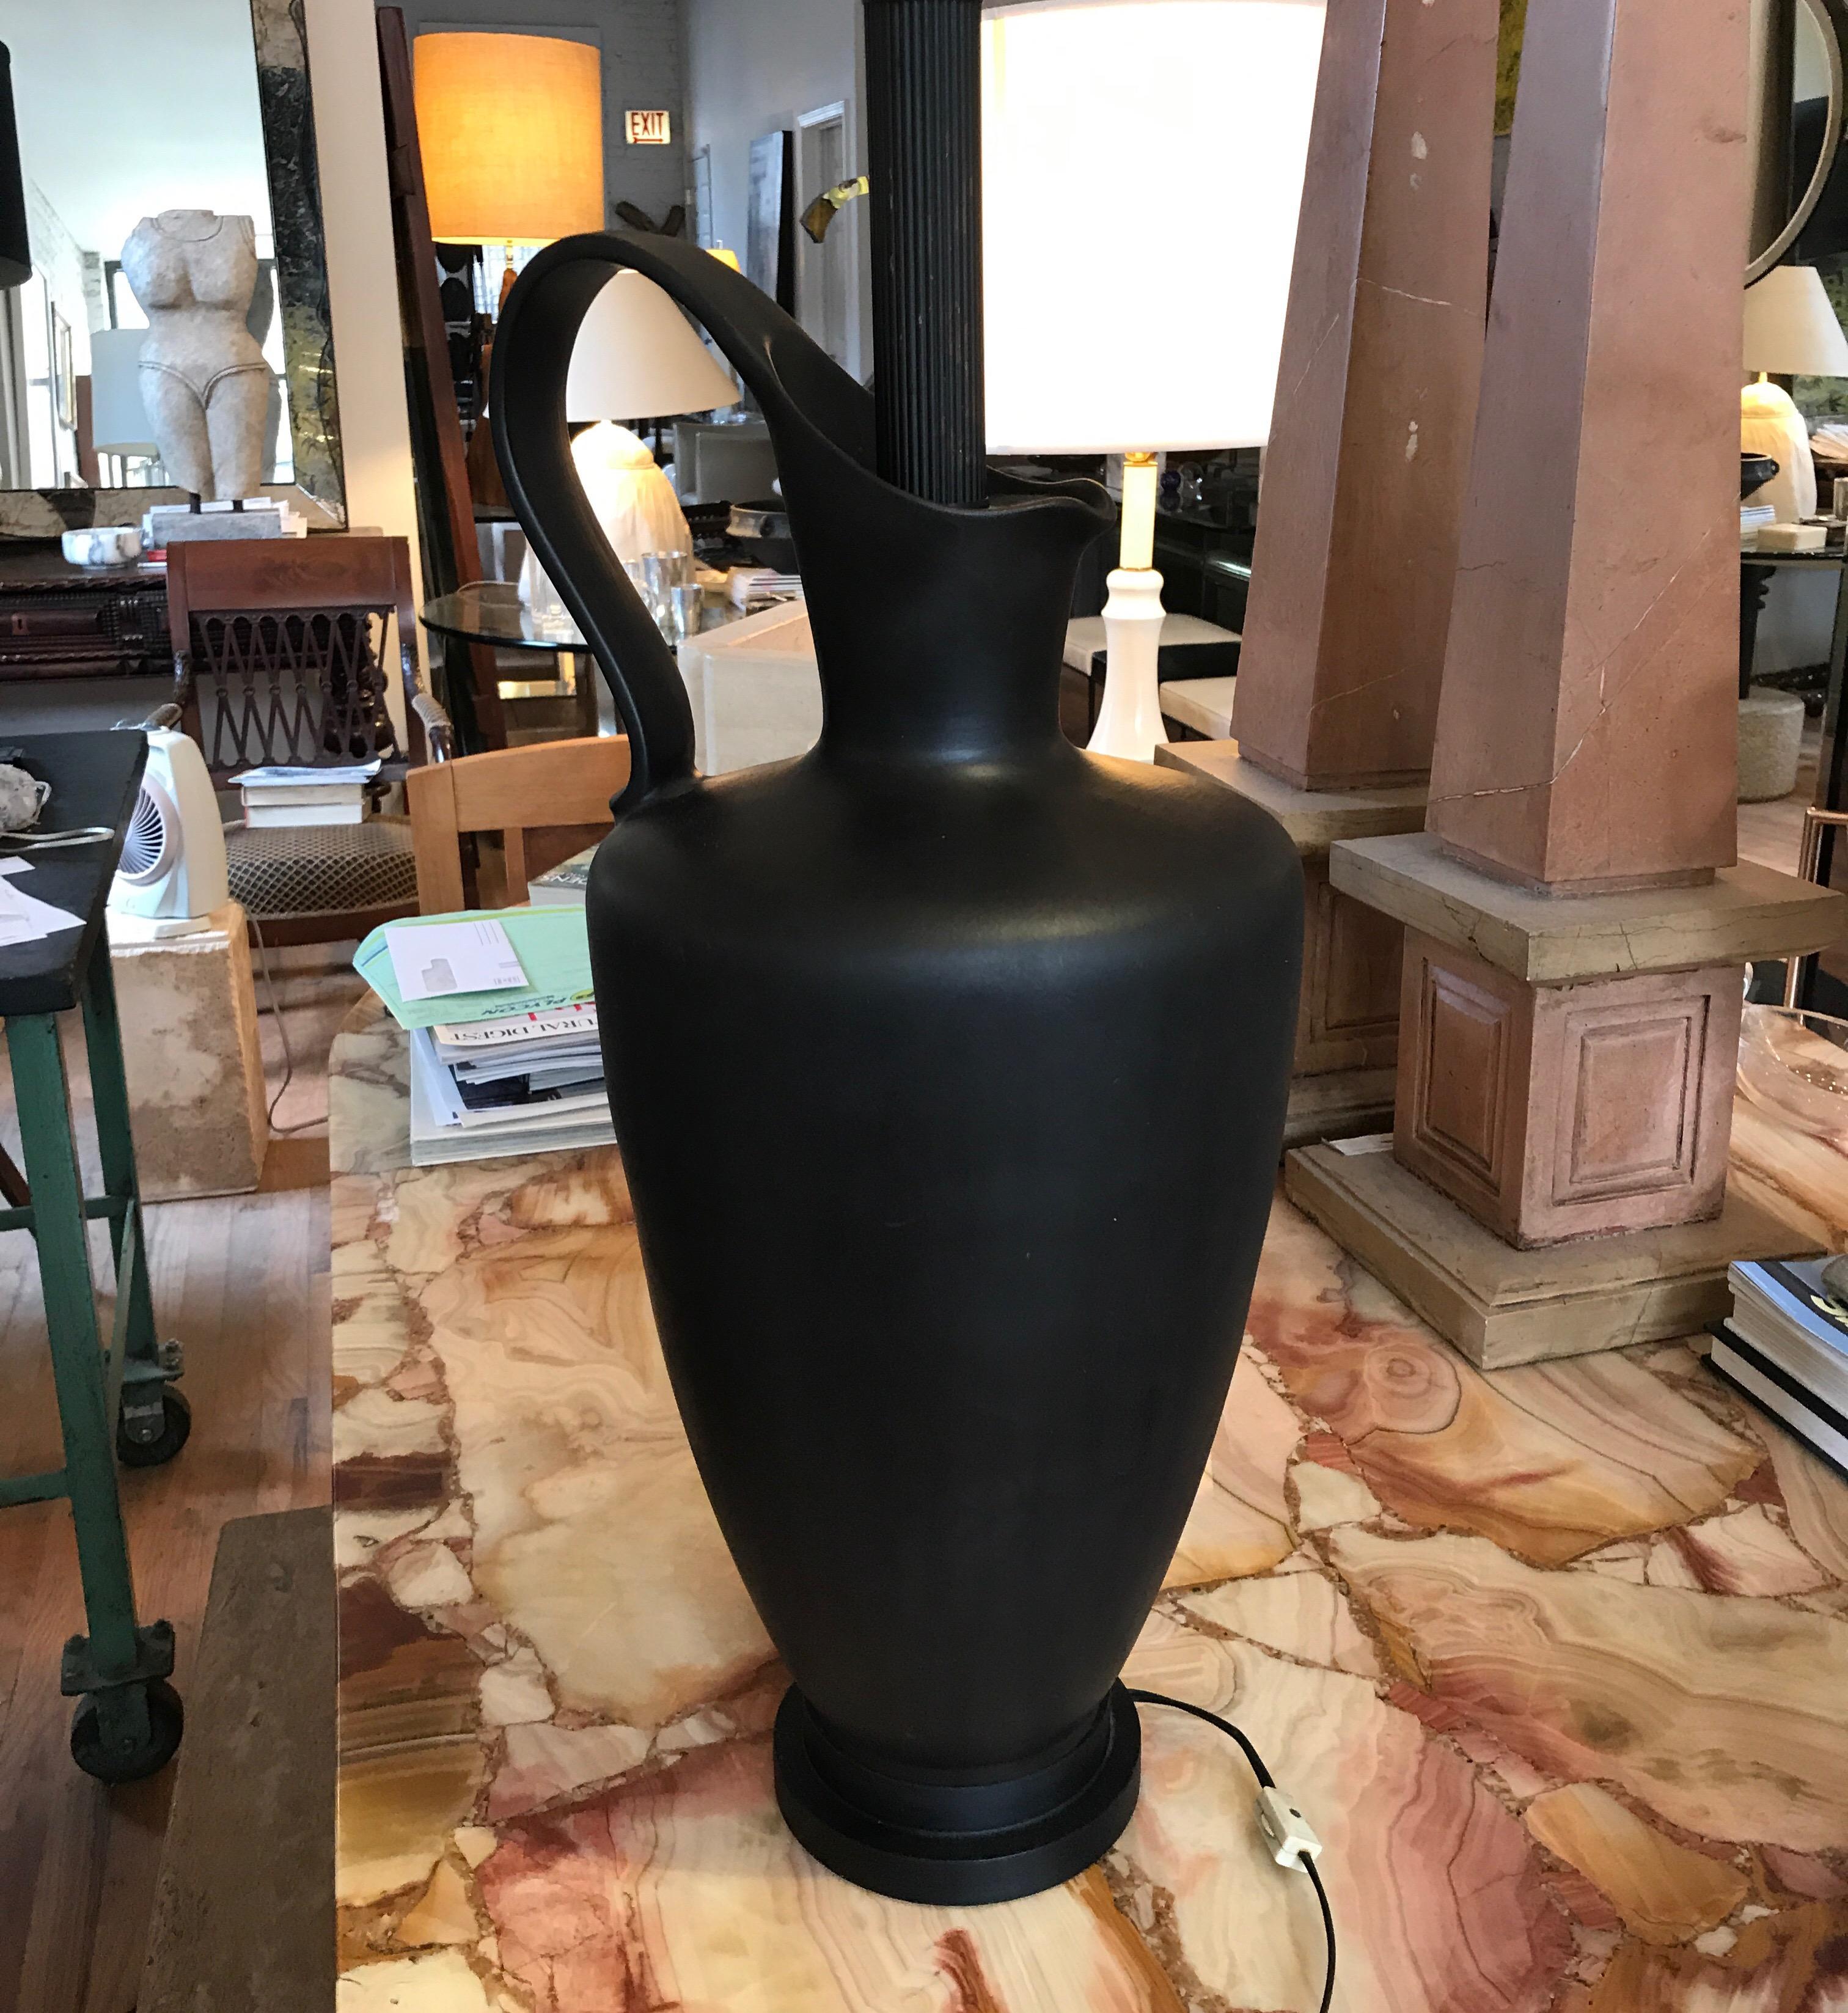 Monumental midcentury black ceramic lamp. The lamp is a Classic Greek form pitcher or Oenochoai. 
Its undecorated black matte form would compliment period or contemporary interiors.
The measurement is to the top of the finial.
The pitcher